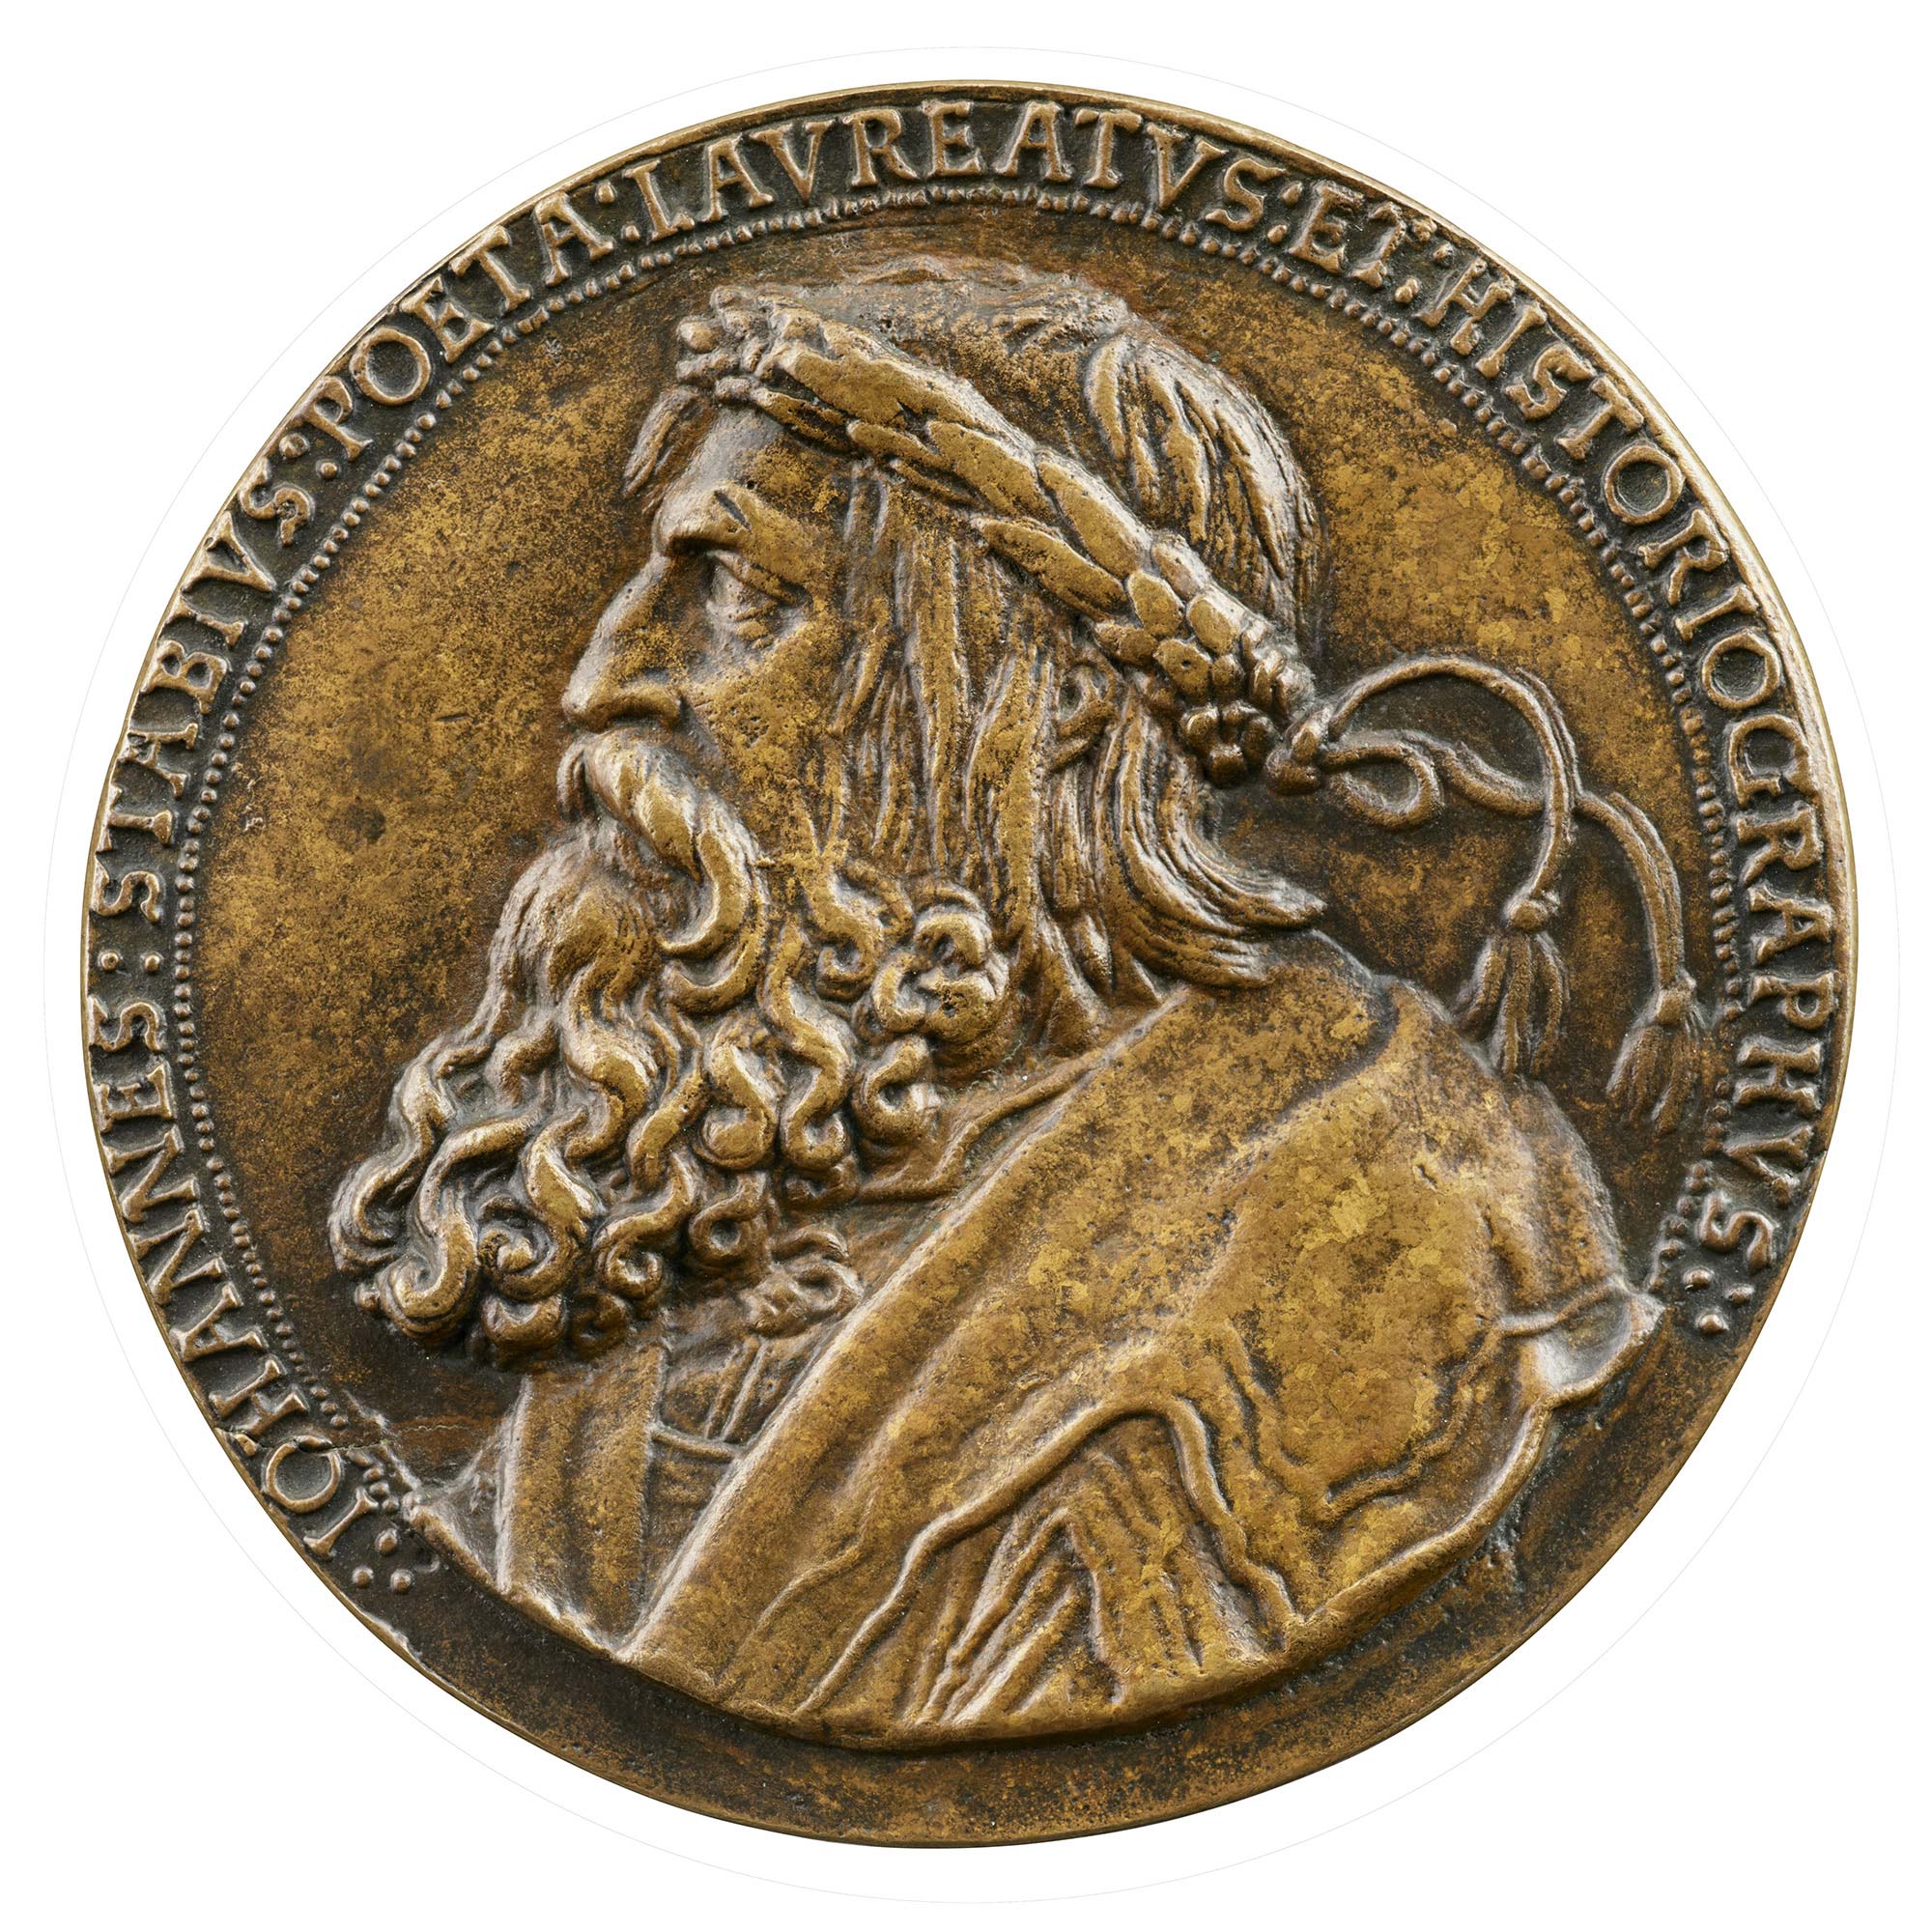 Bronze medal of a man wearing a cloak with a wide collar, and a laurel wreath on his head